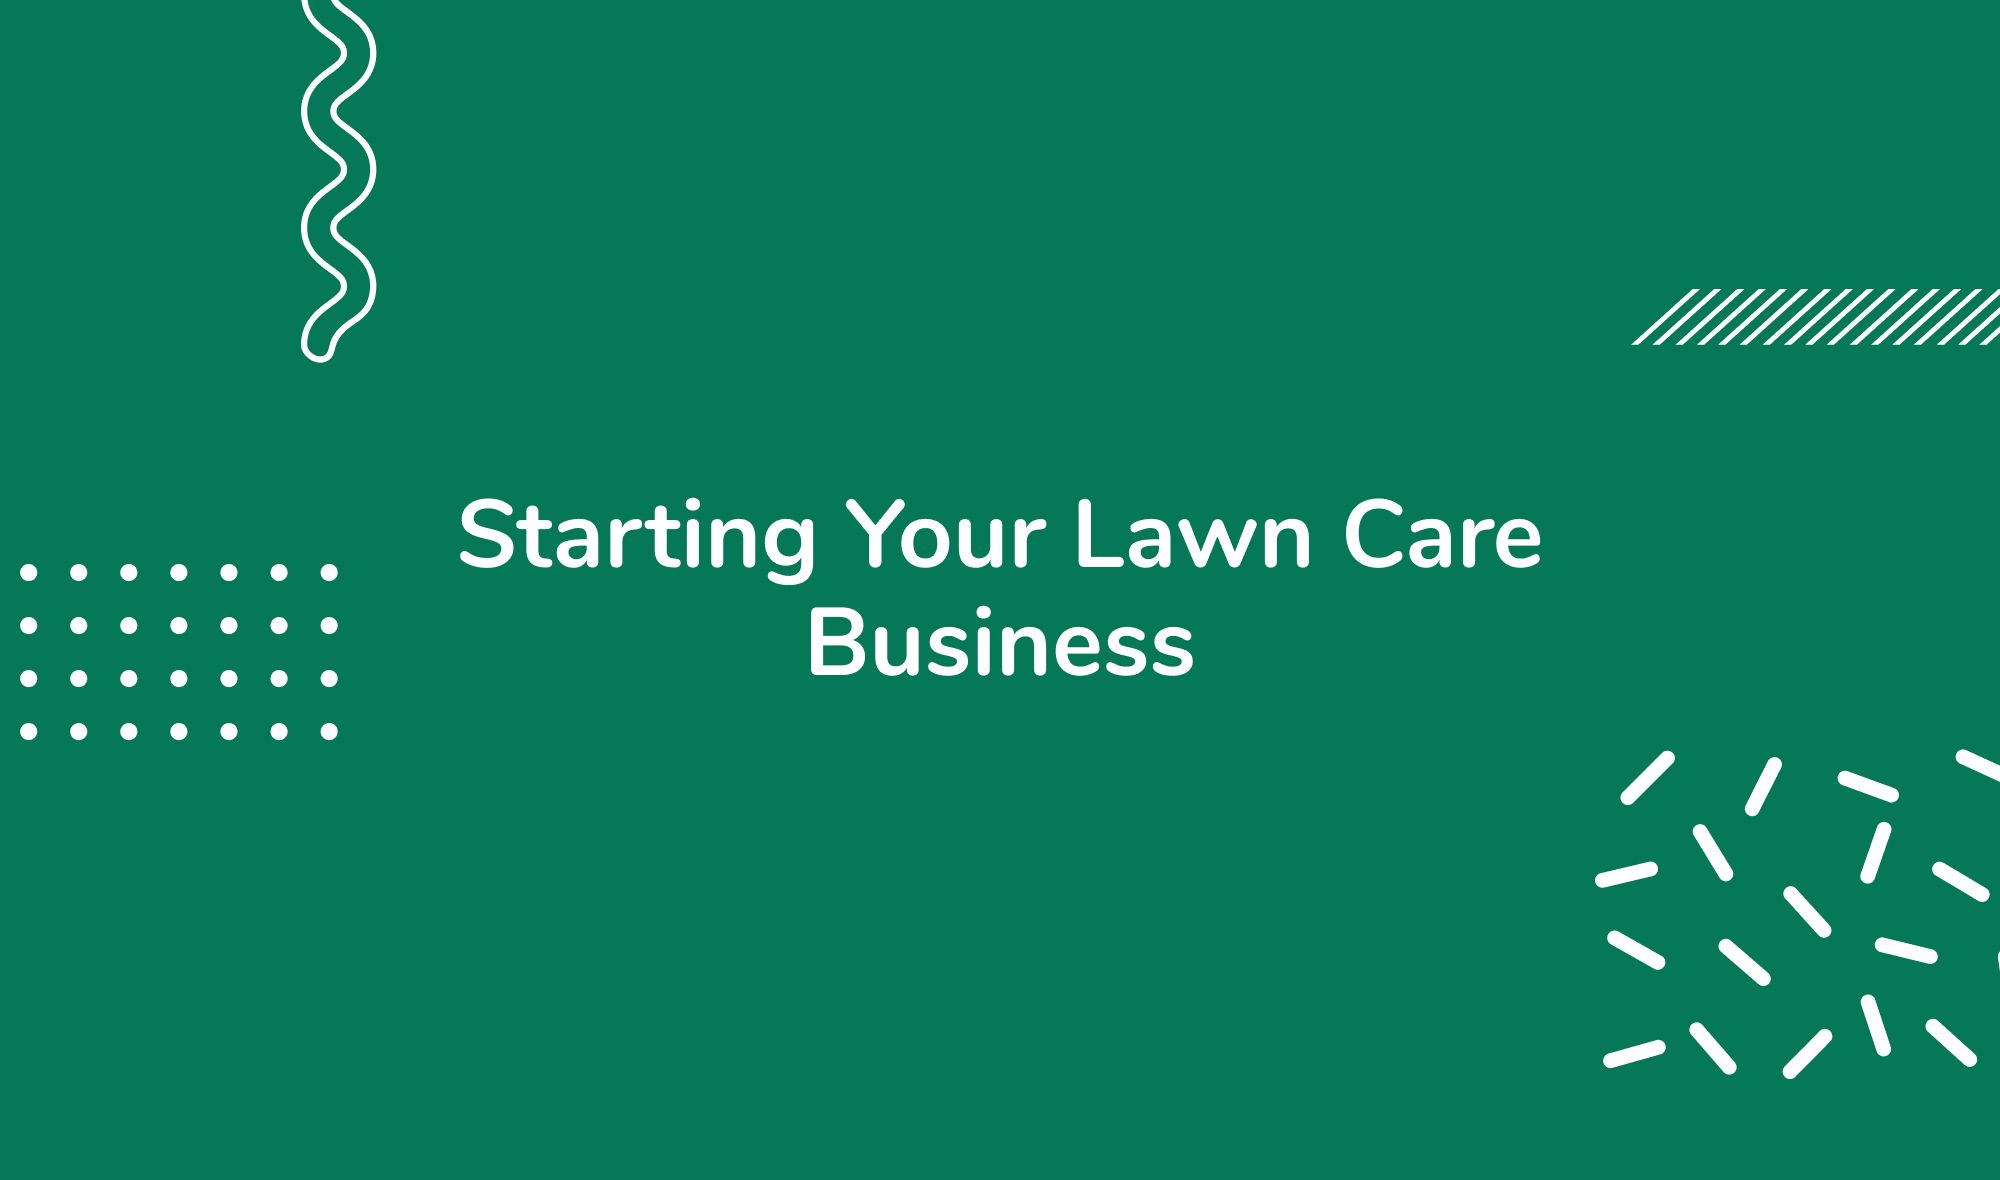 Starting Your Lawn Care Business